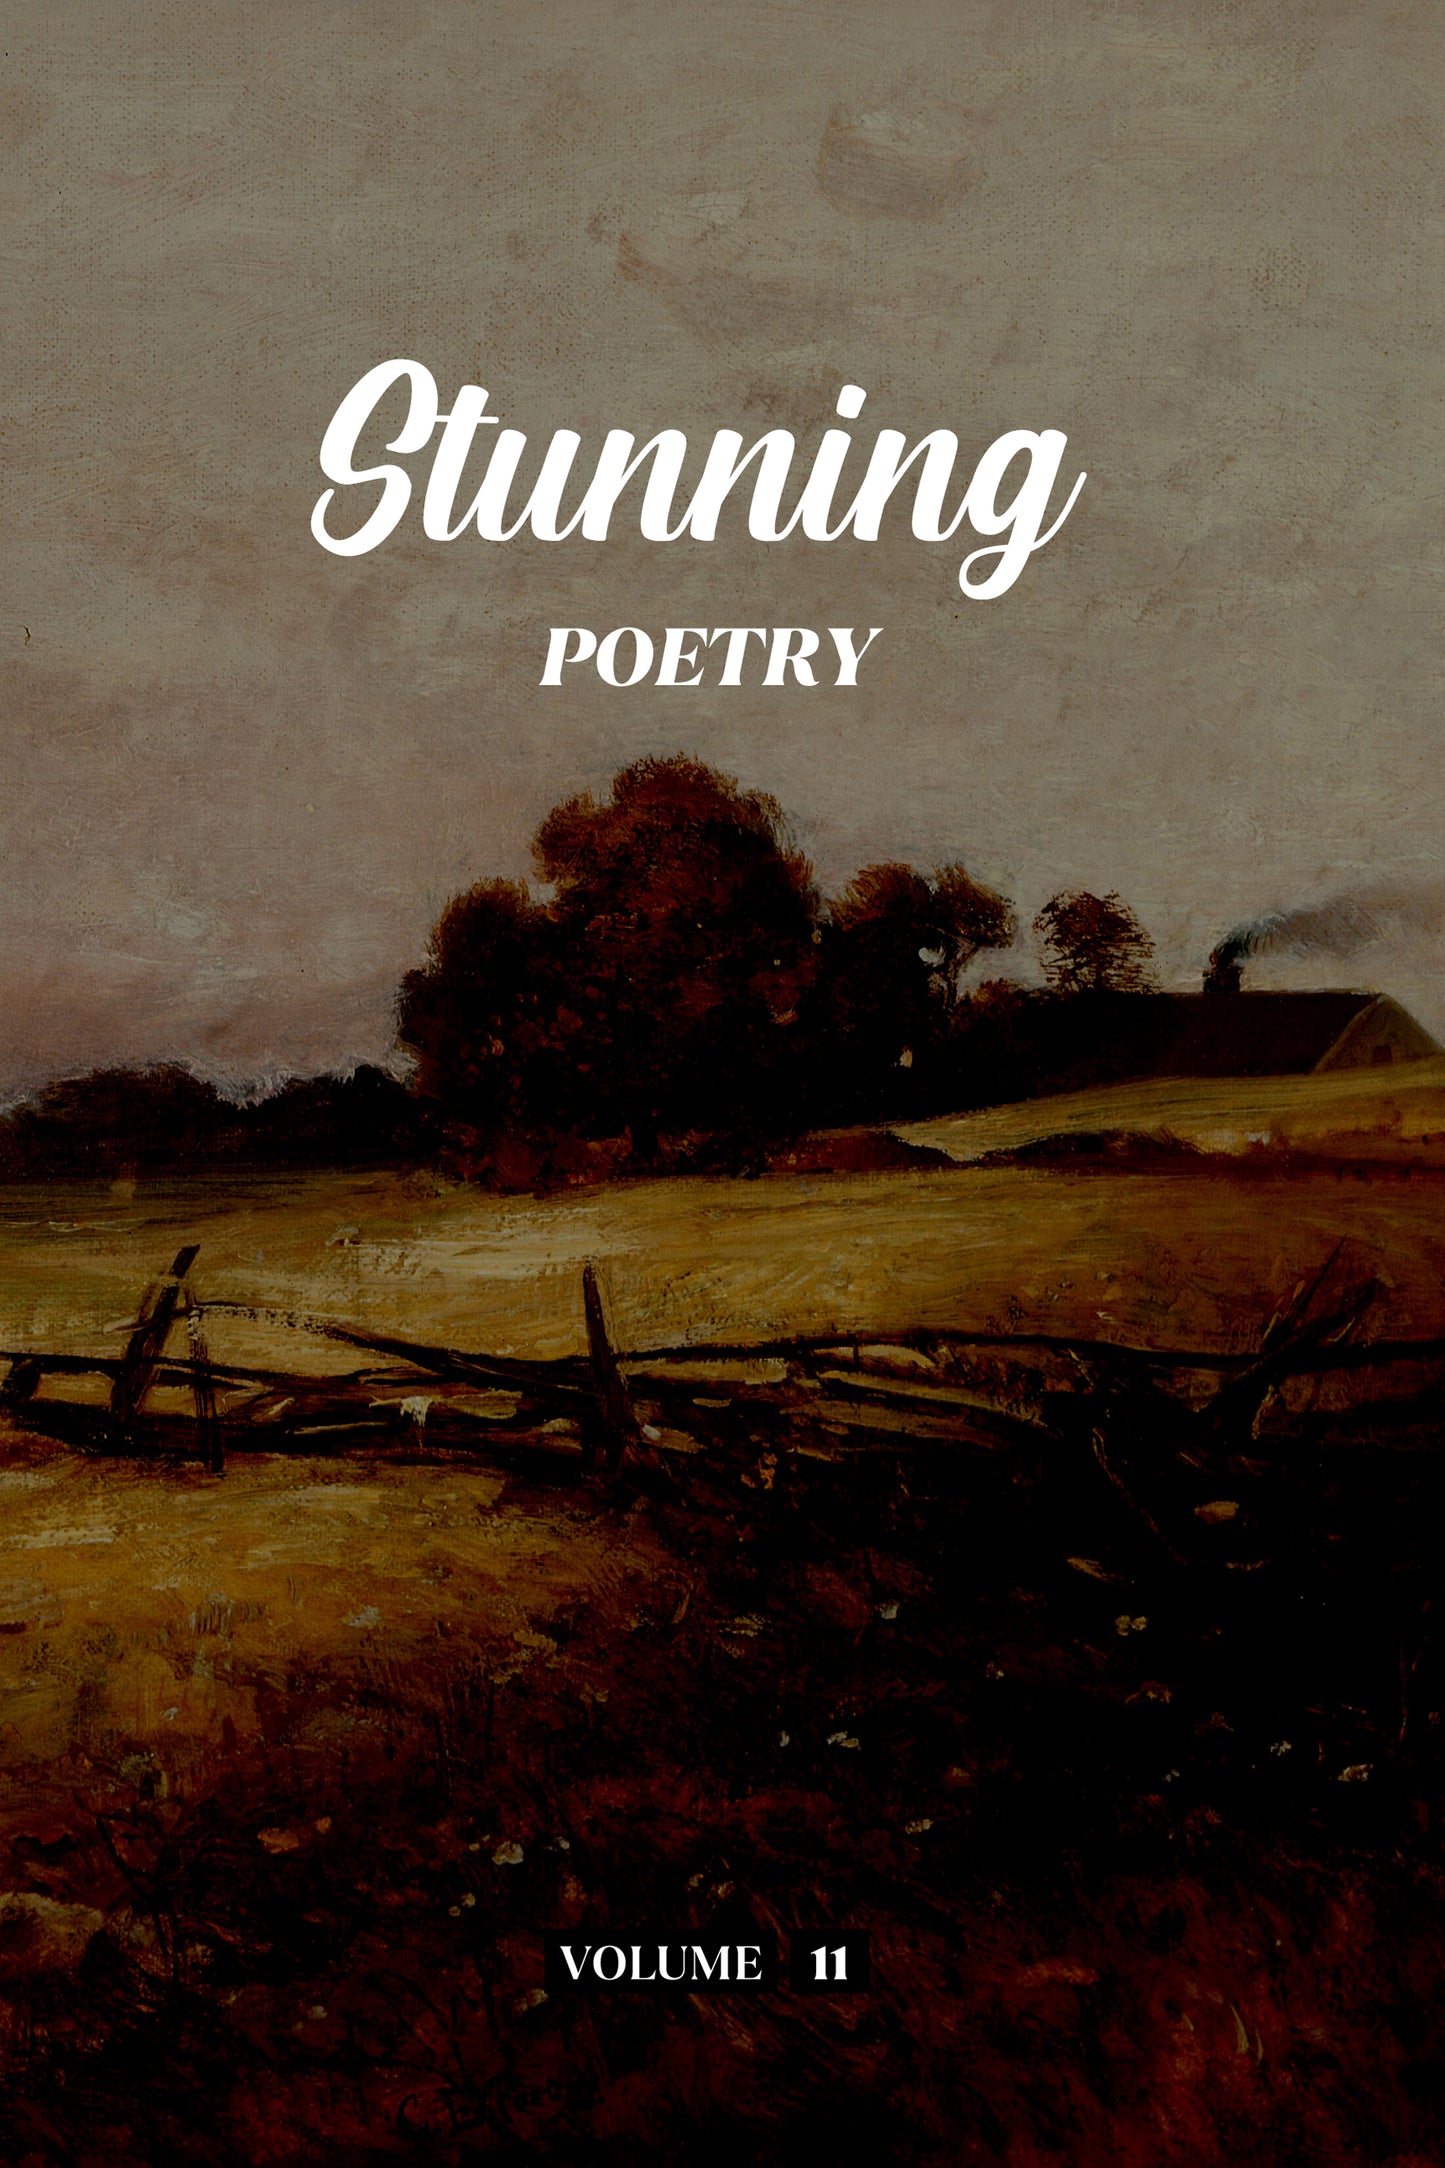 Stunning Poetry (Volume 11) - Physical Book